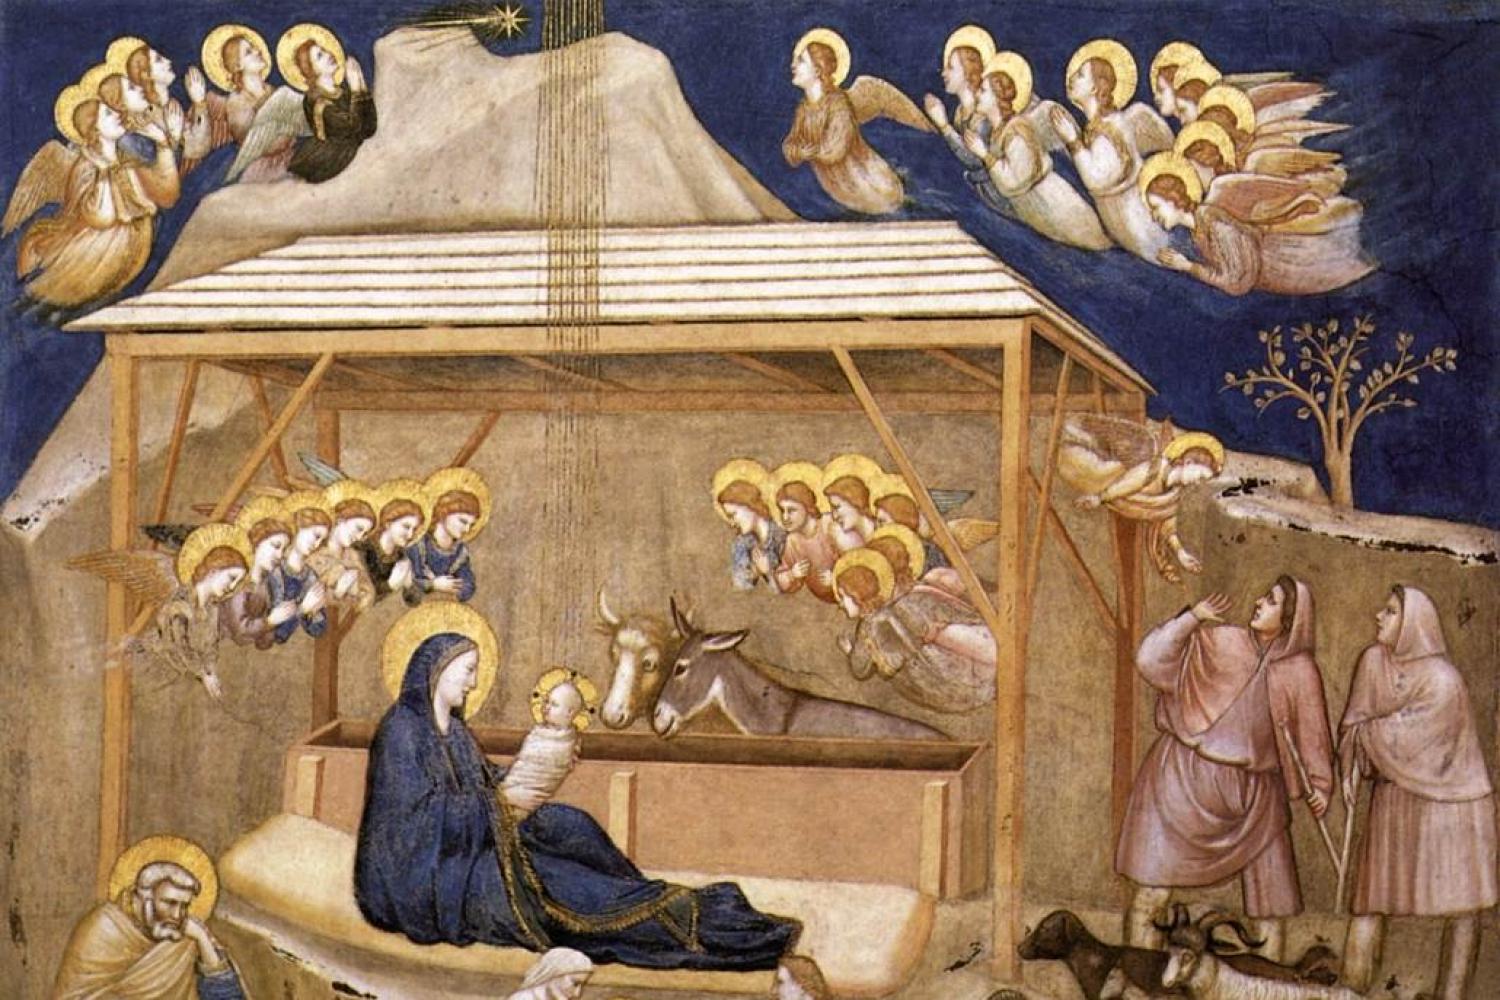 Giotto&#039;s &quot;Nativity&quot; from the Lower Church of the Basilica of Saint Francis in Assisi